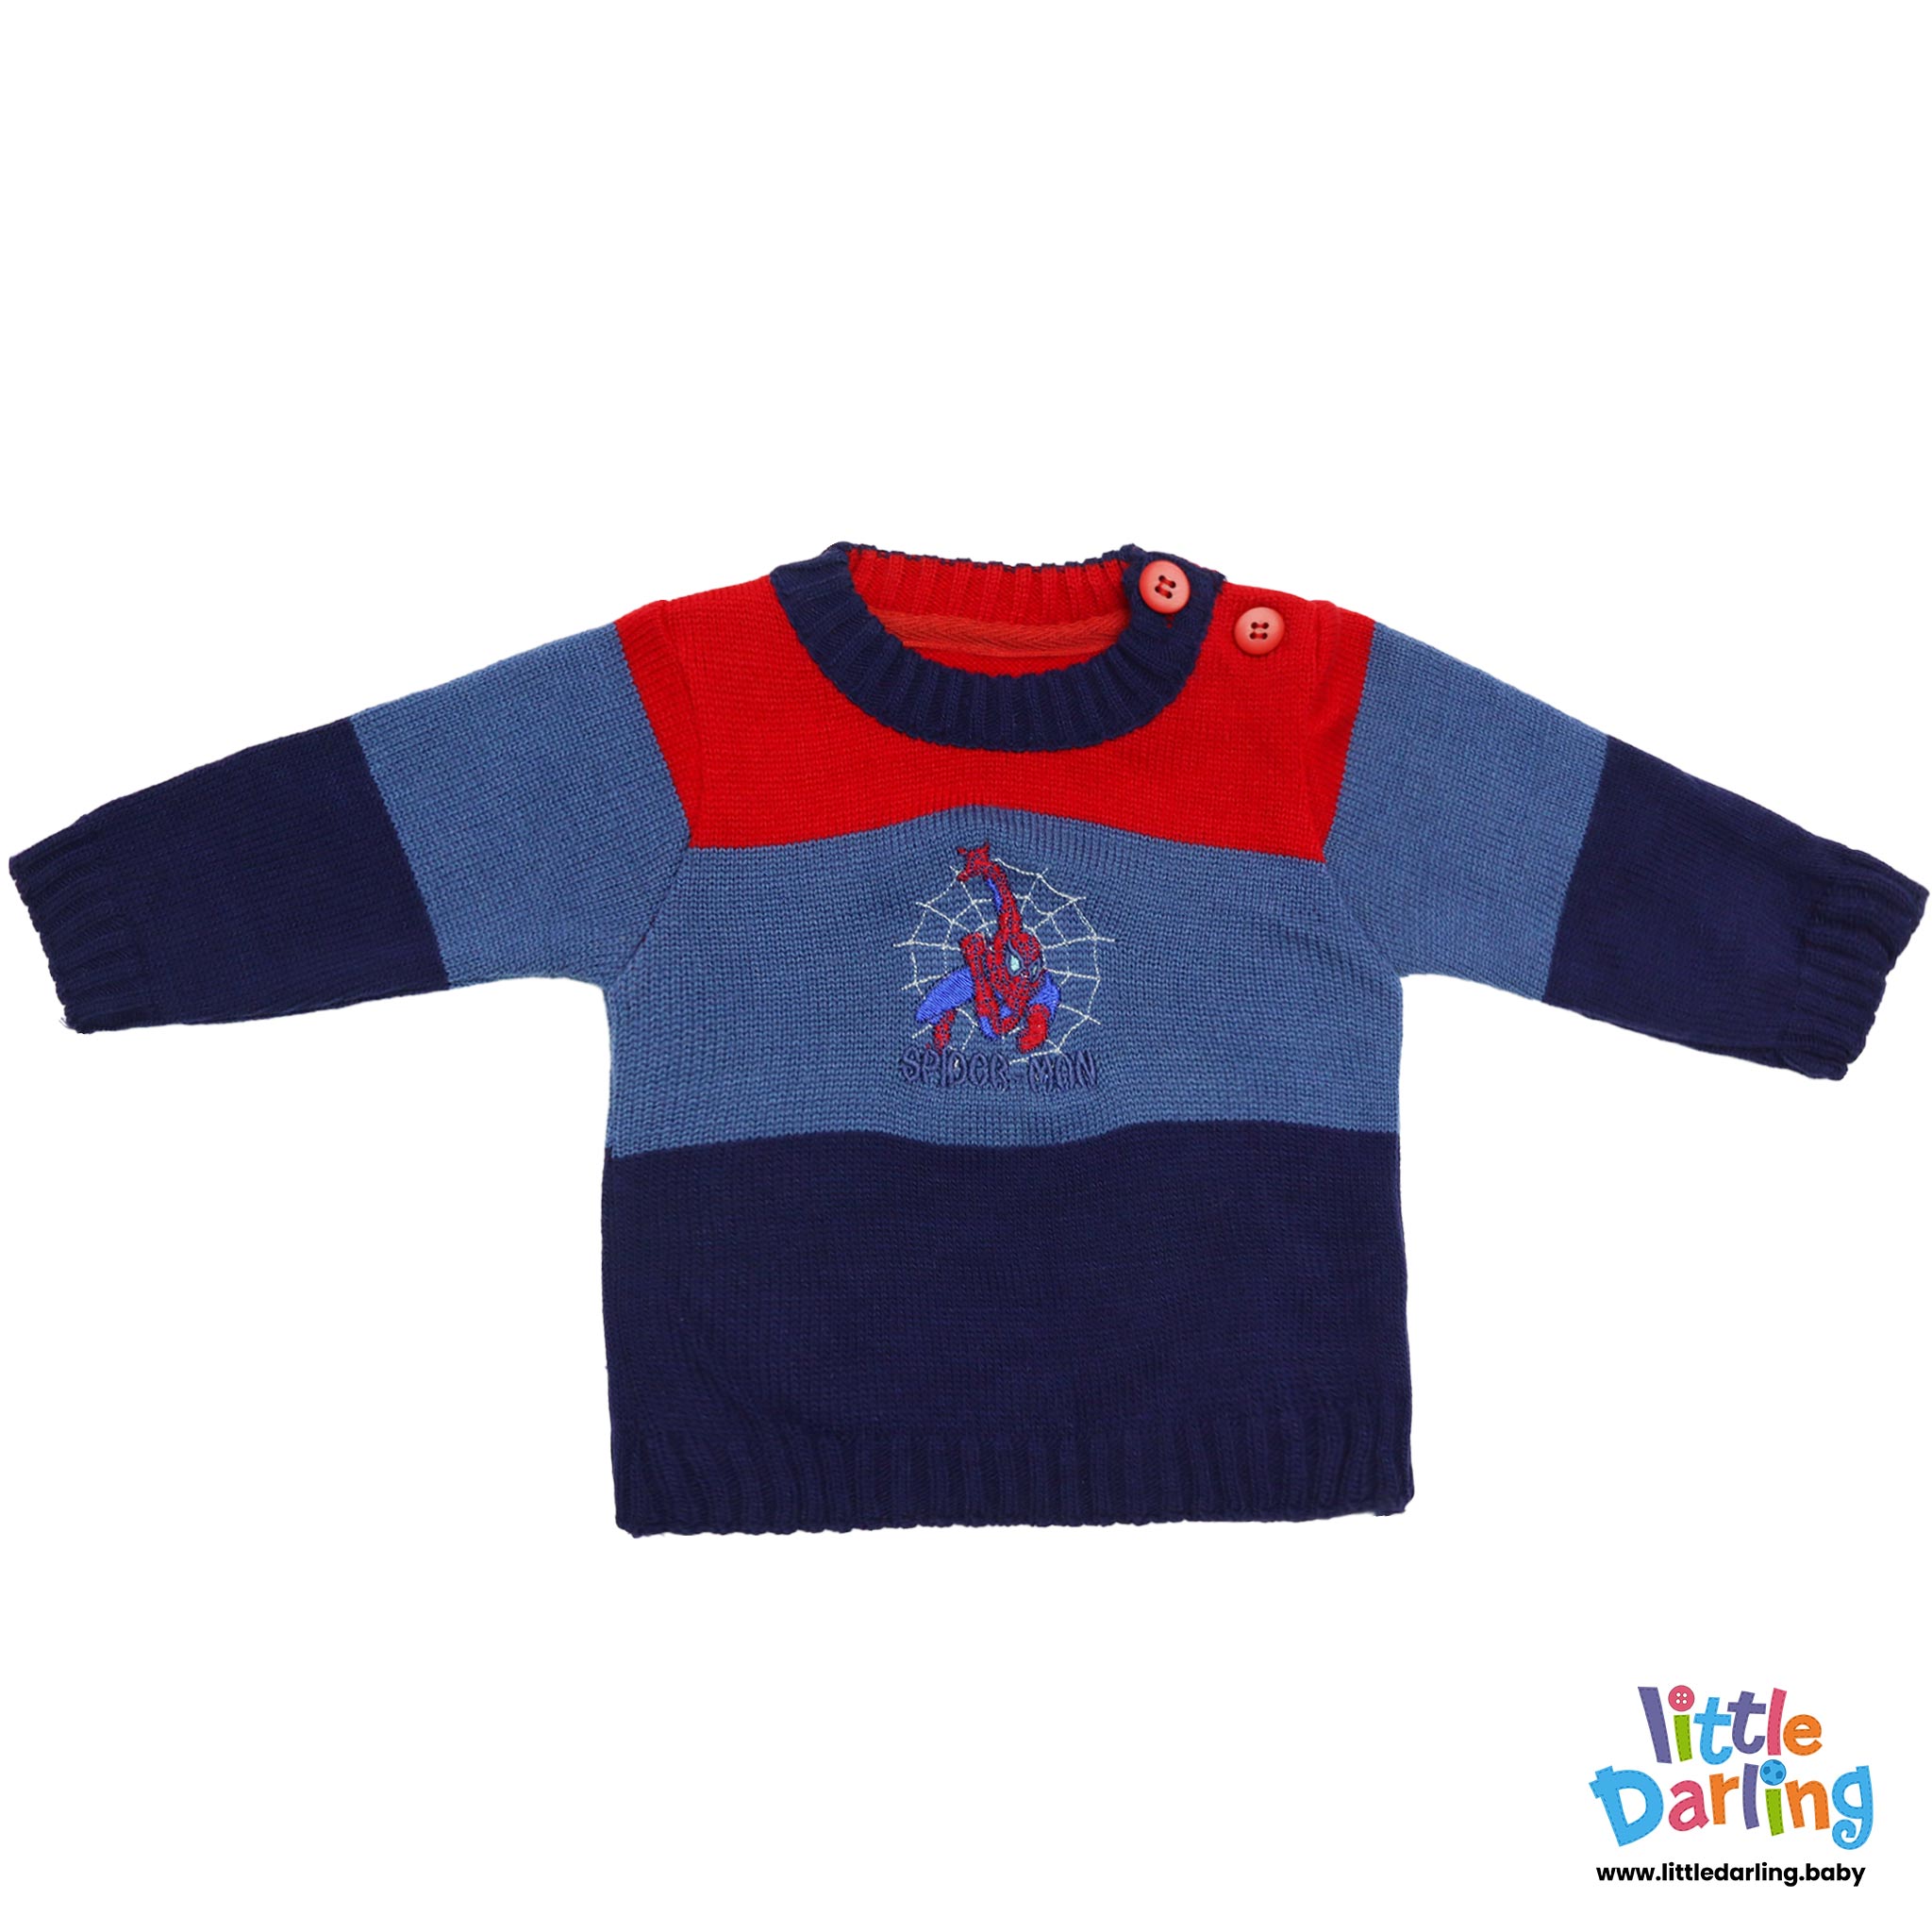 Woolen Shirt Spider Man Embroidery Blue Color by Little Darling